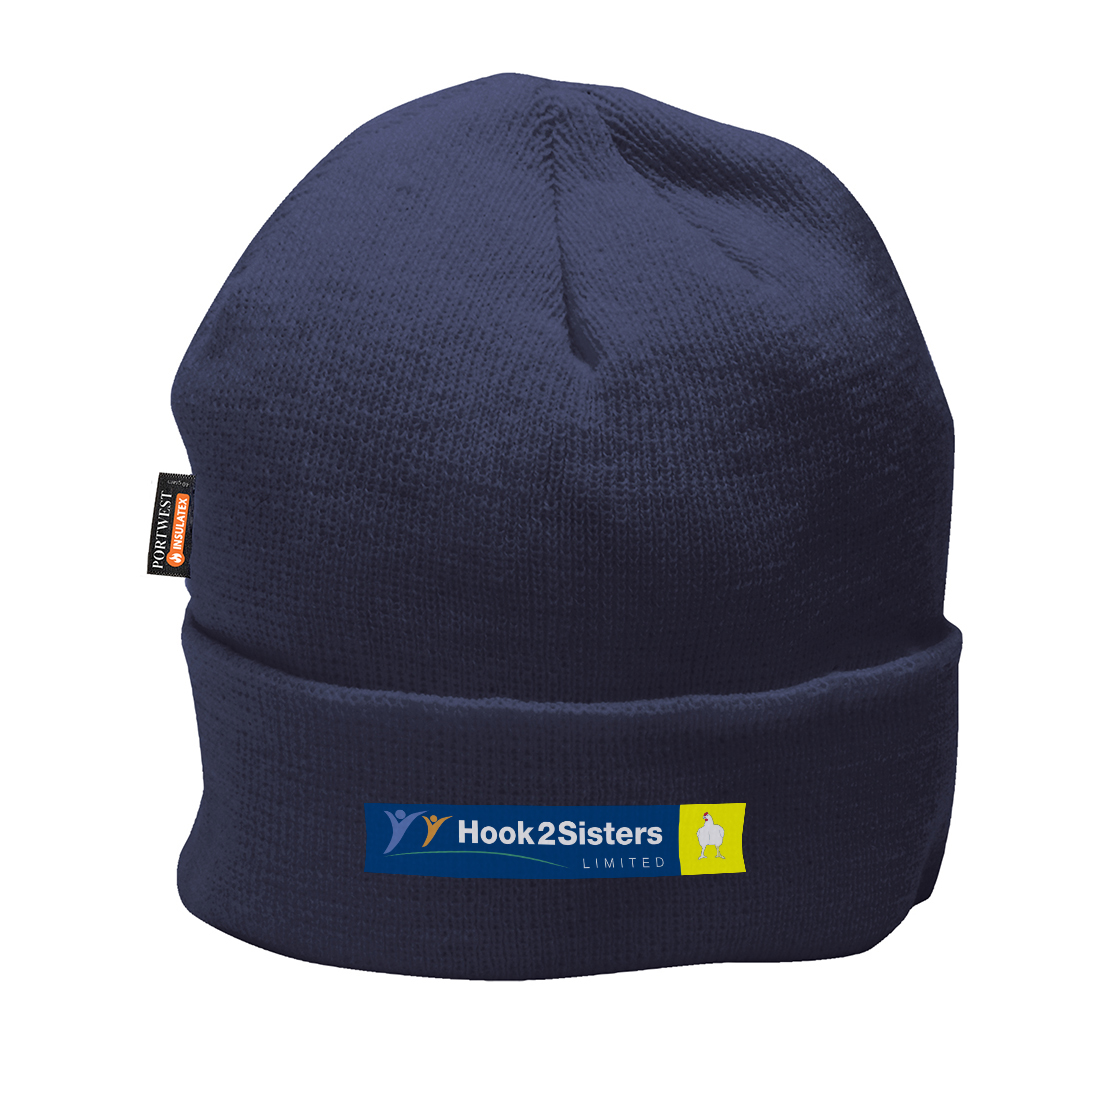 Hook2Sisters Ltd - Beanie Hat, Navy, Embroidered